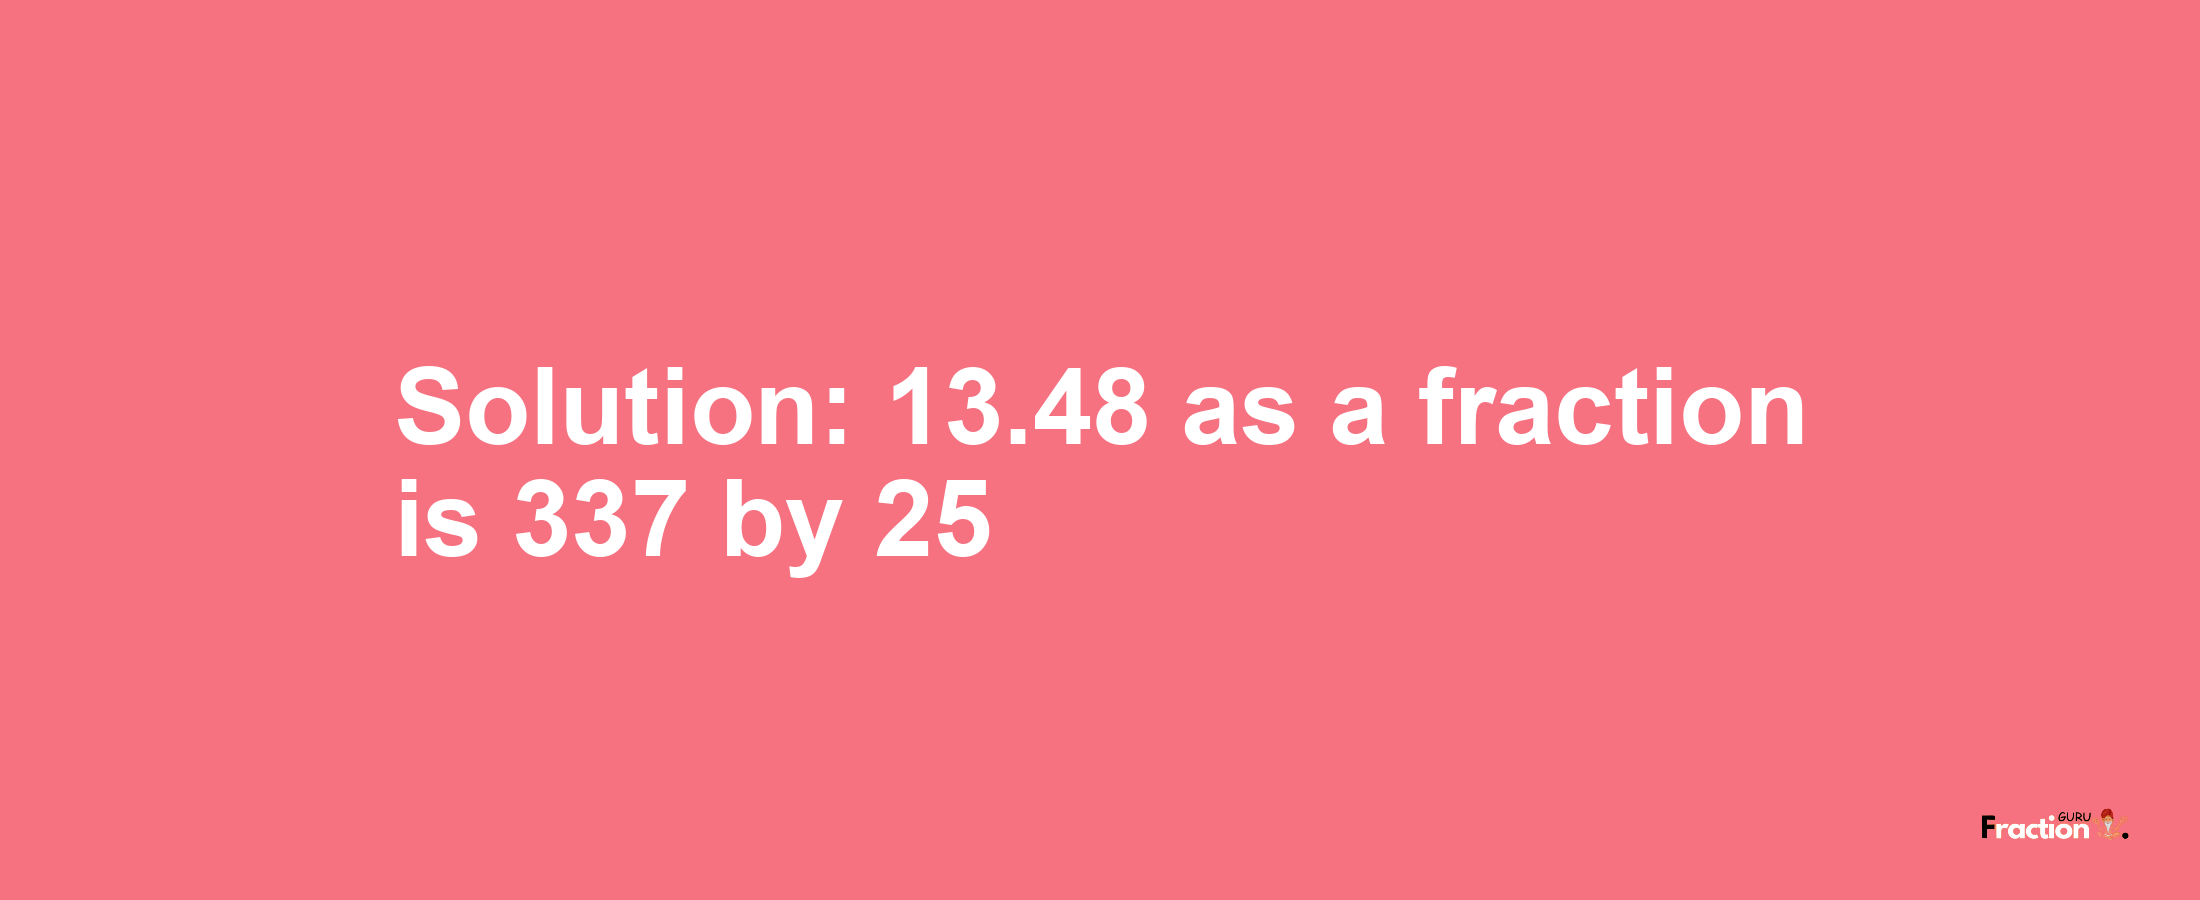 Solution:13.48 as a fraction is 337/25